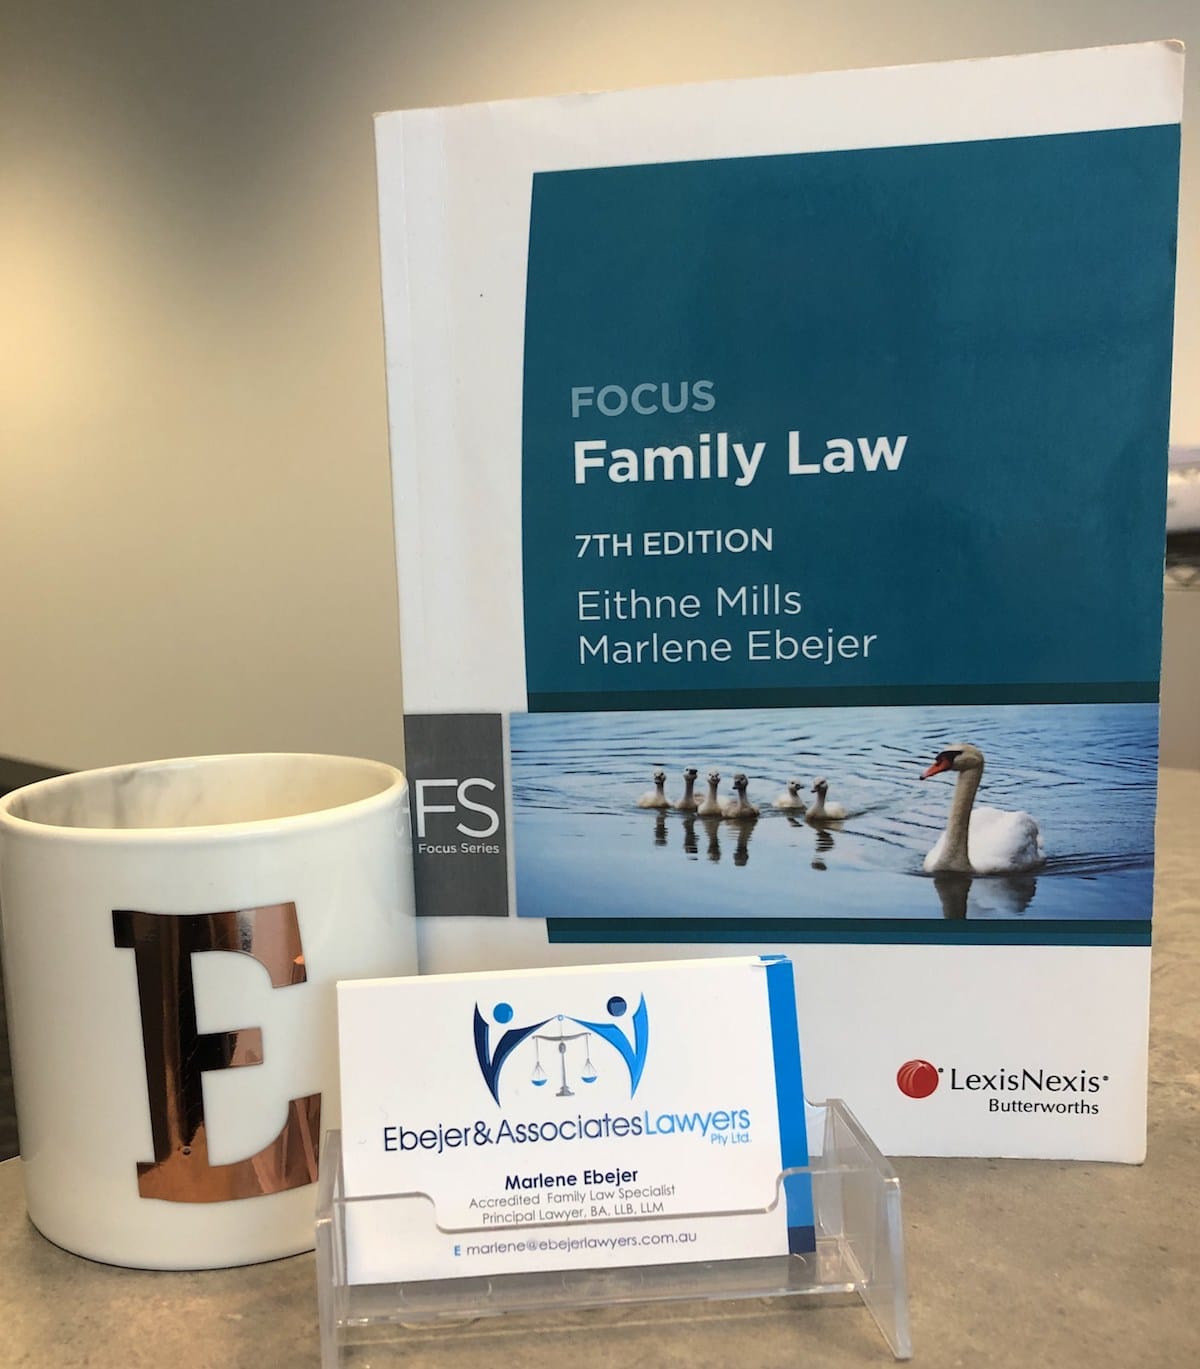 Marlene Ebejer commissioned to co-write 8th edition of Family Law